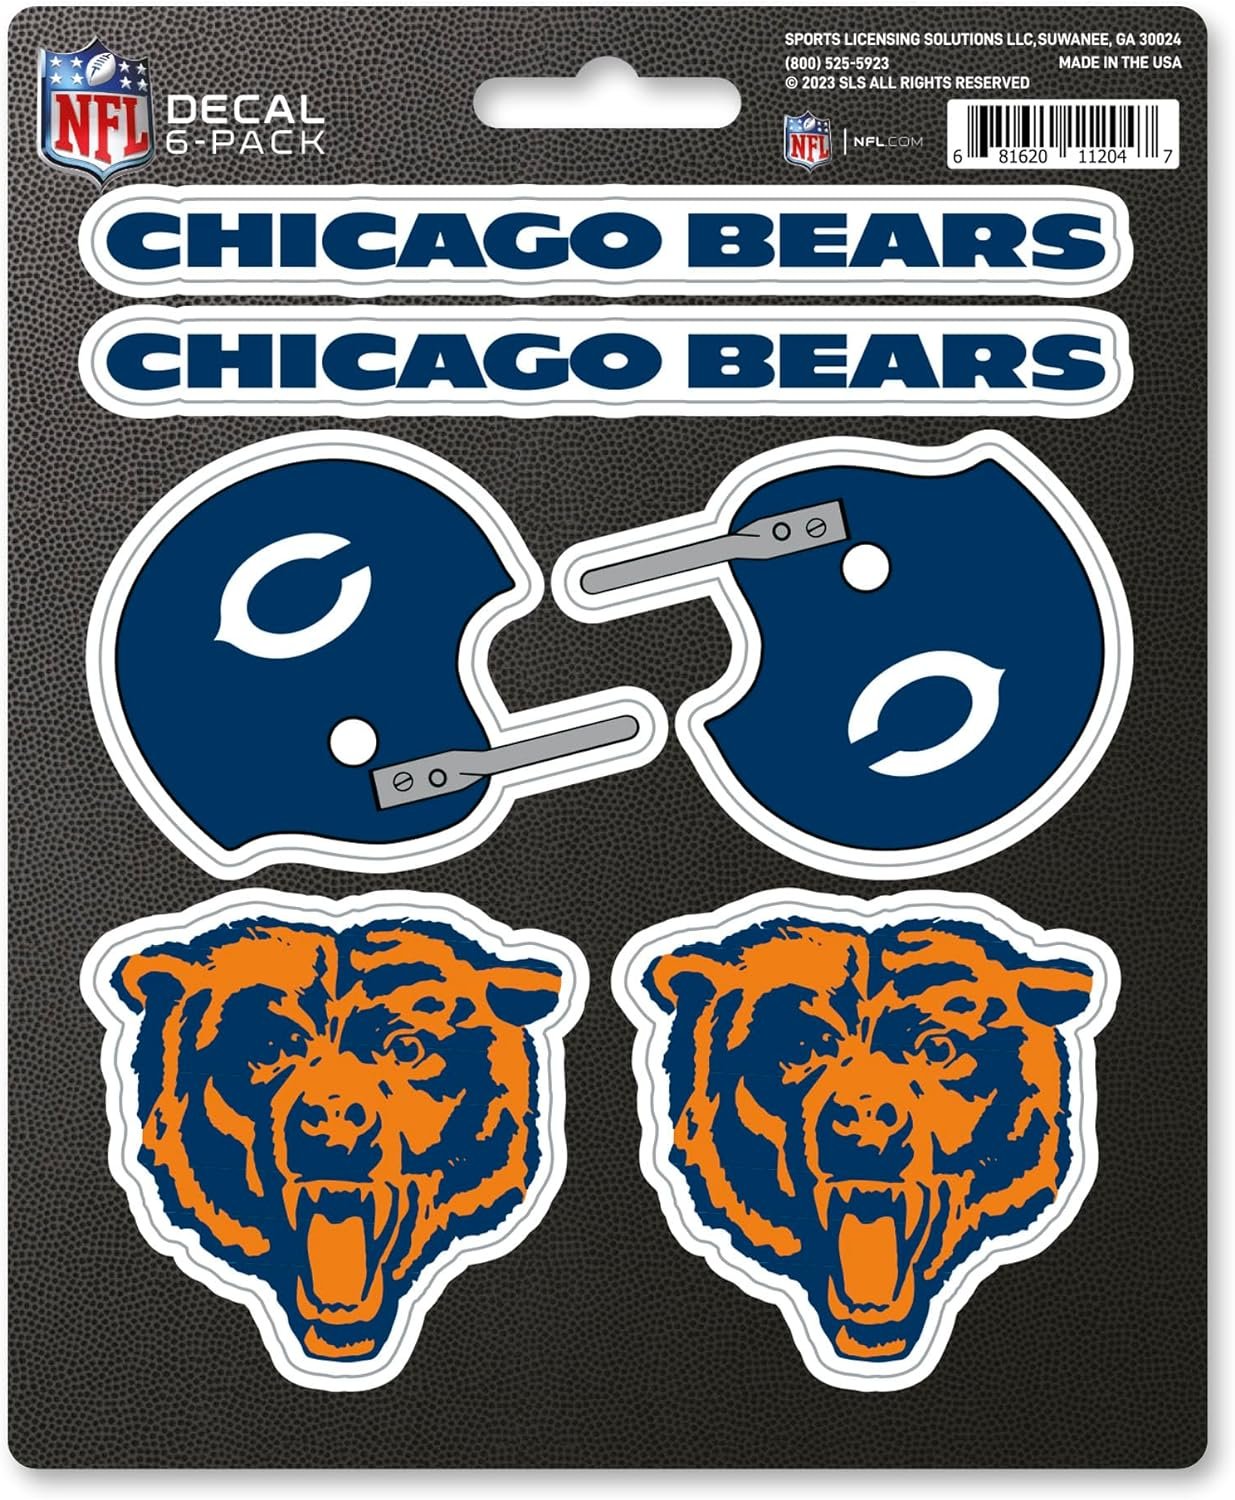 Chicago Bears 6-Piece Decal Sticker Set, Vintage Retro Logo, 5x6 Inch Sheet, Gift for football fans for any hard surfaces around home, automotive, personal items